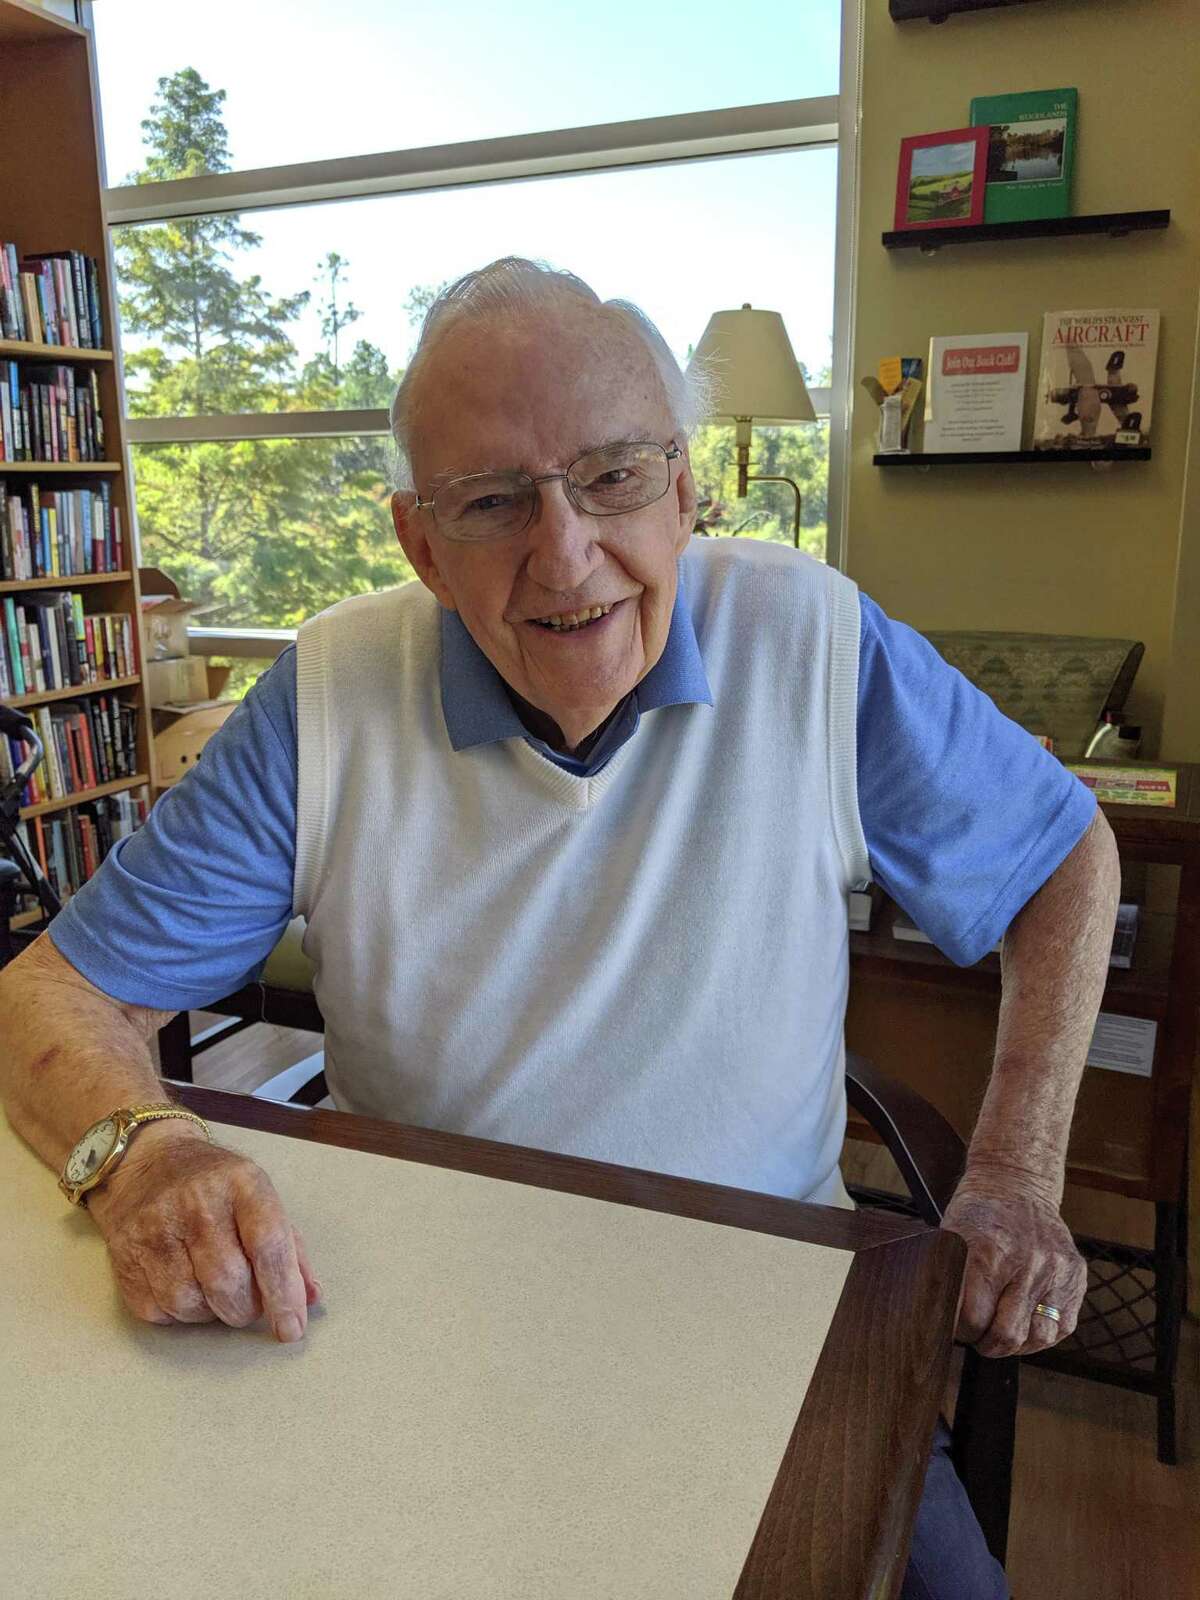 The Woodlands would not be the place it is today without the spiritual work of Don Gebert, a pastor chosen specifically to help develop religious life in the planned community. Gebert died at the age of 91 in March and a celebration of his life will be held at his former church Saturday afternoon.